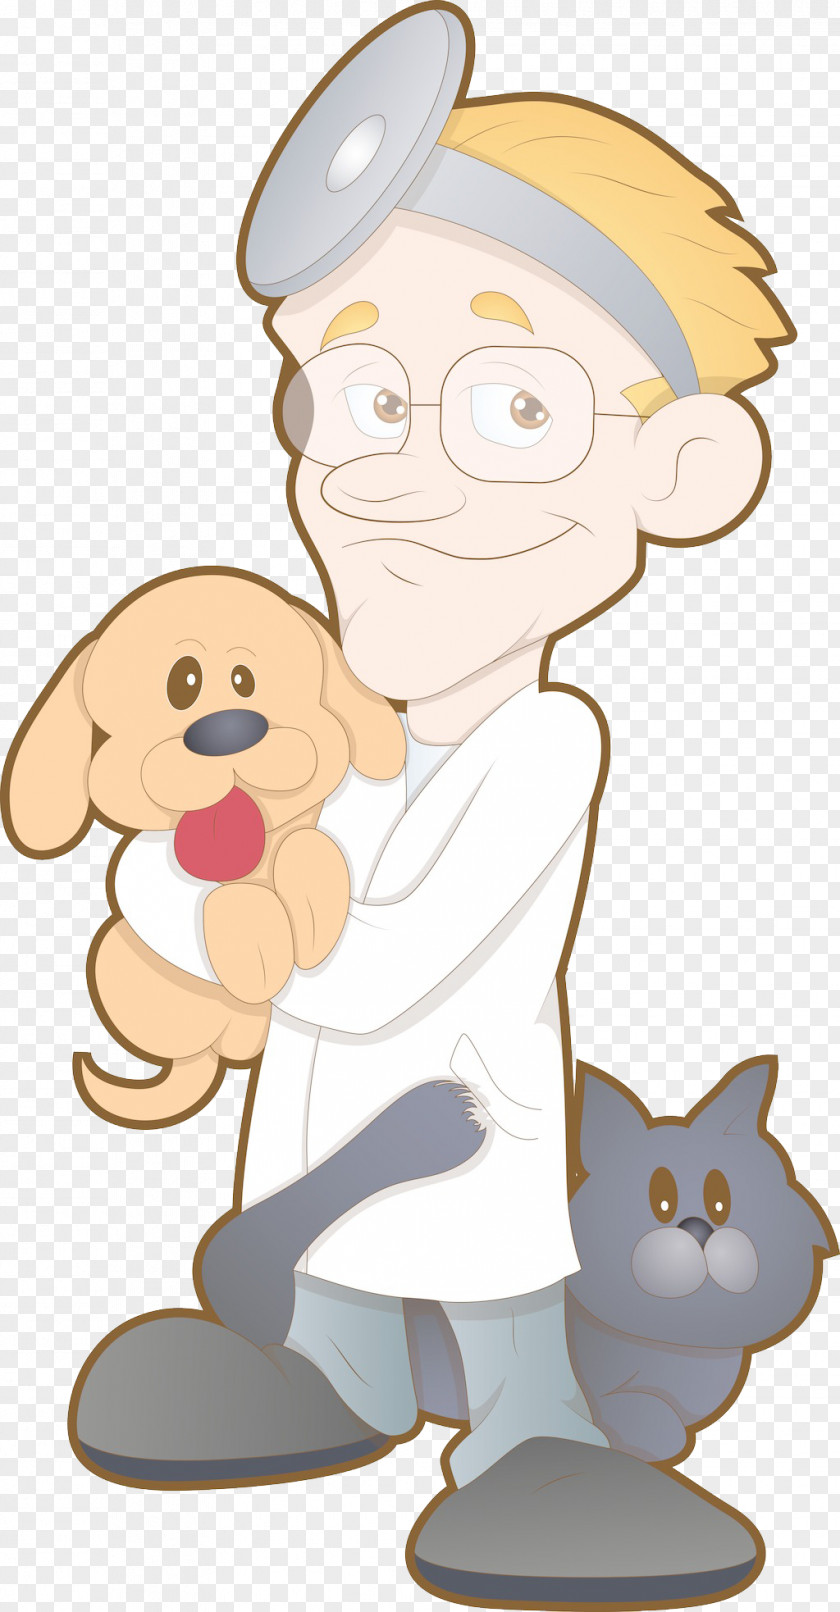 Holding A Dog Pet Doctor Cat Veterinarian Physician Clip Art PNG